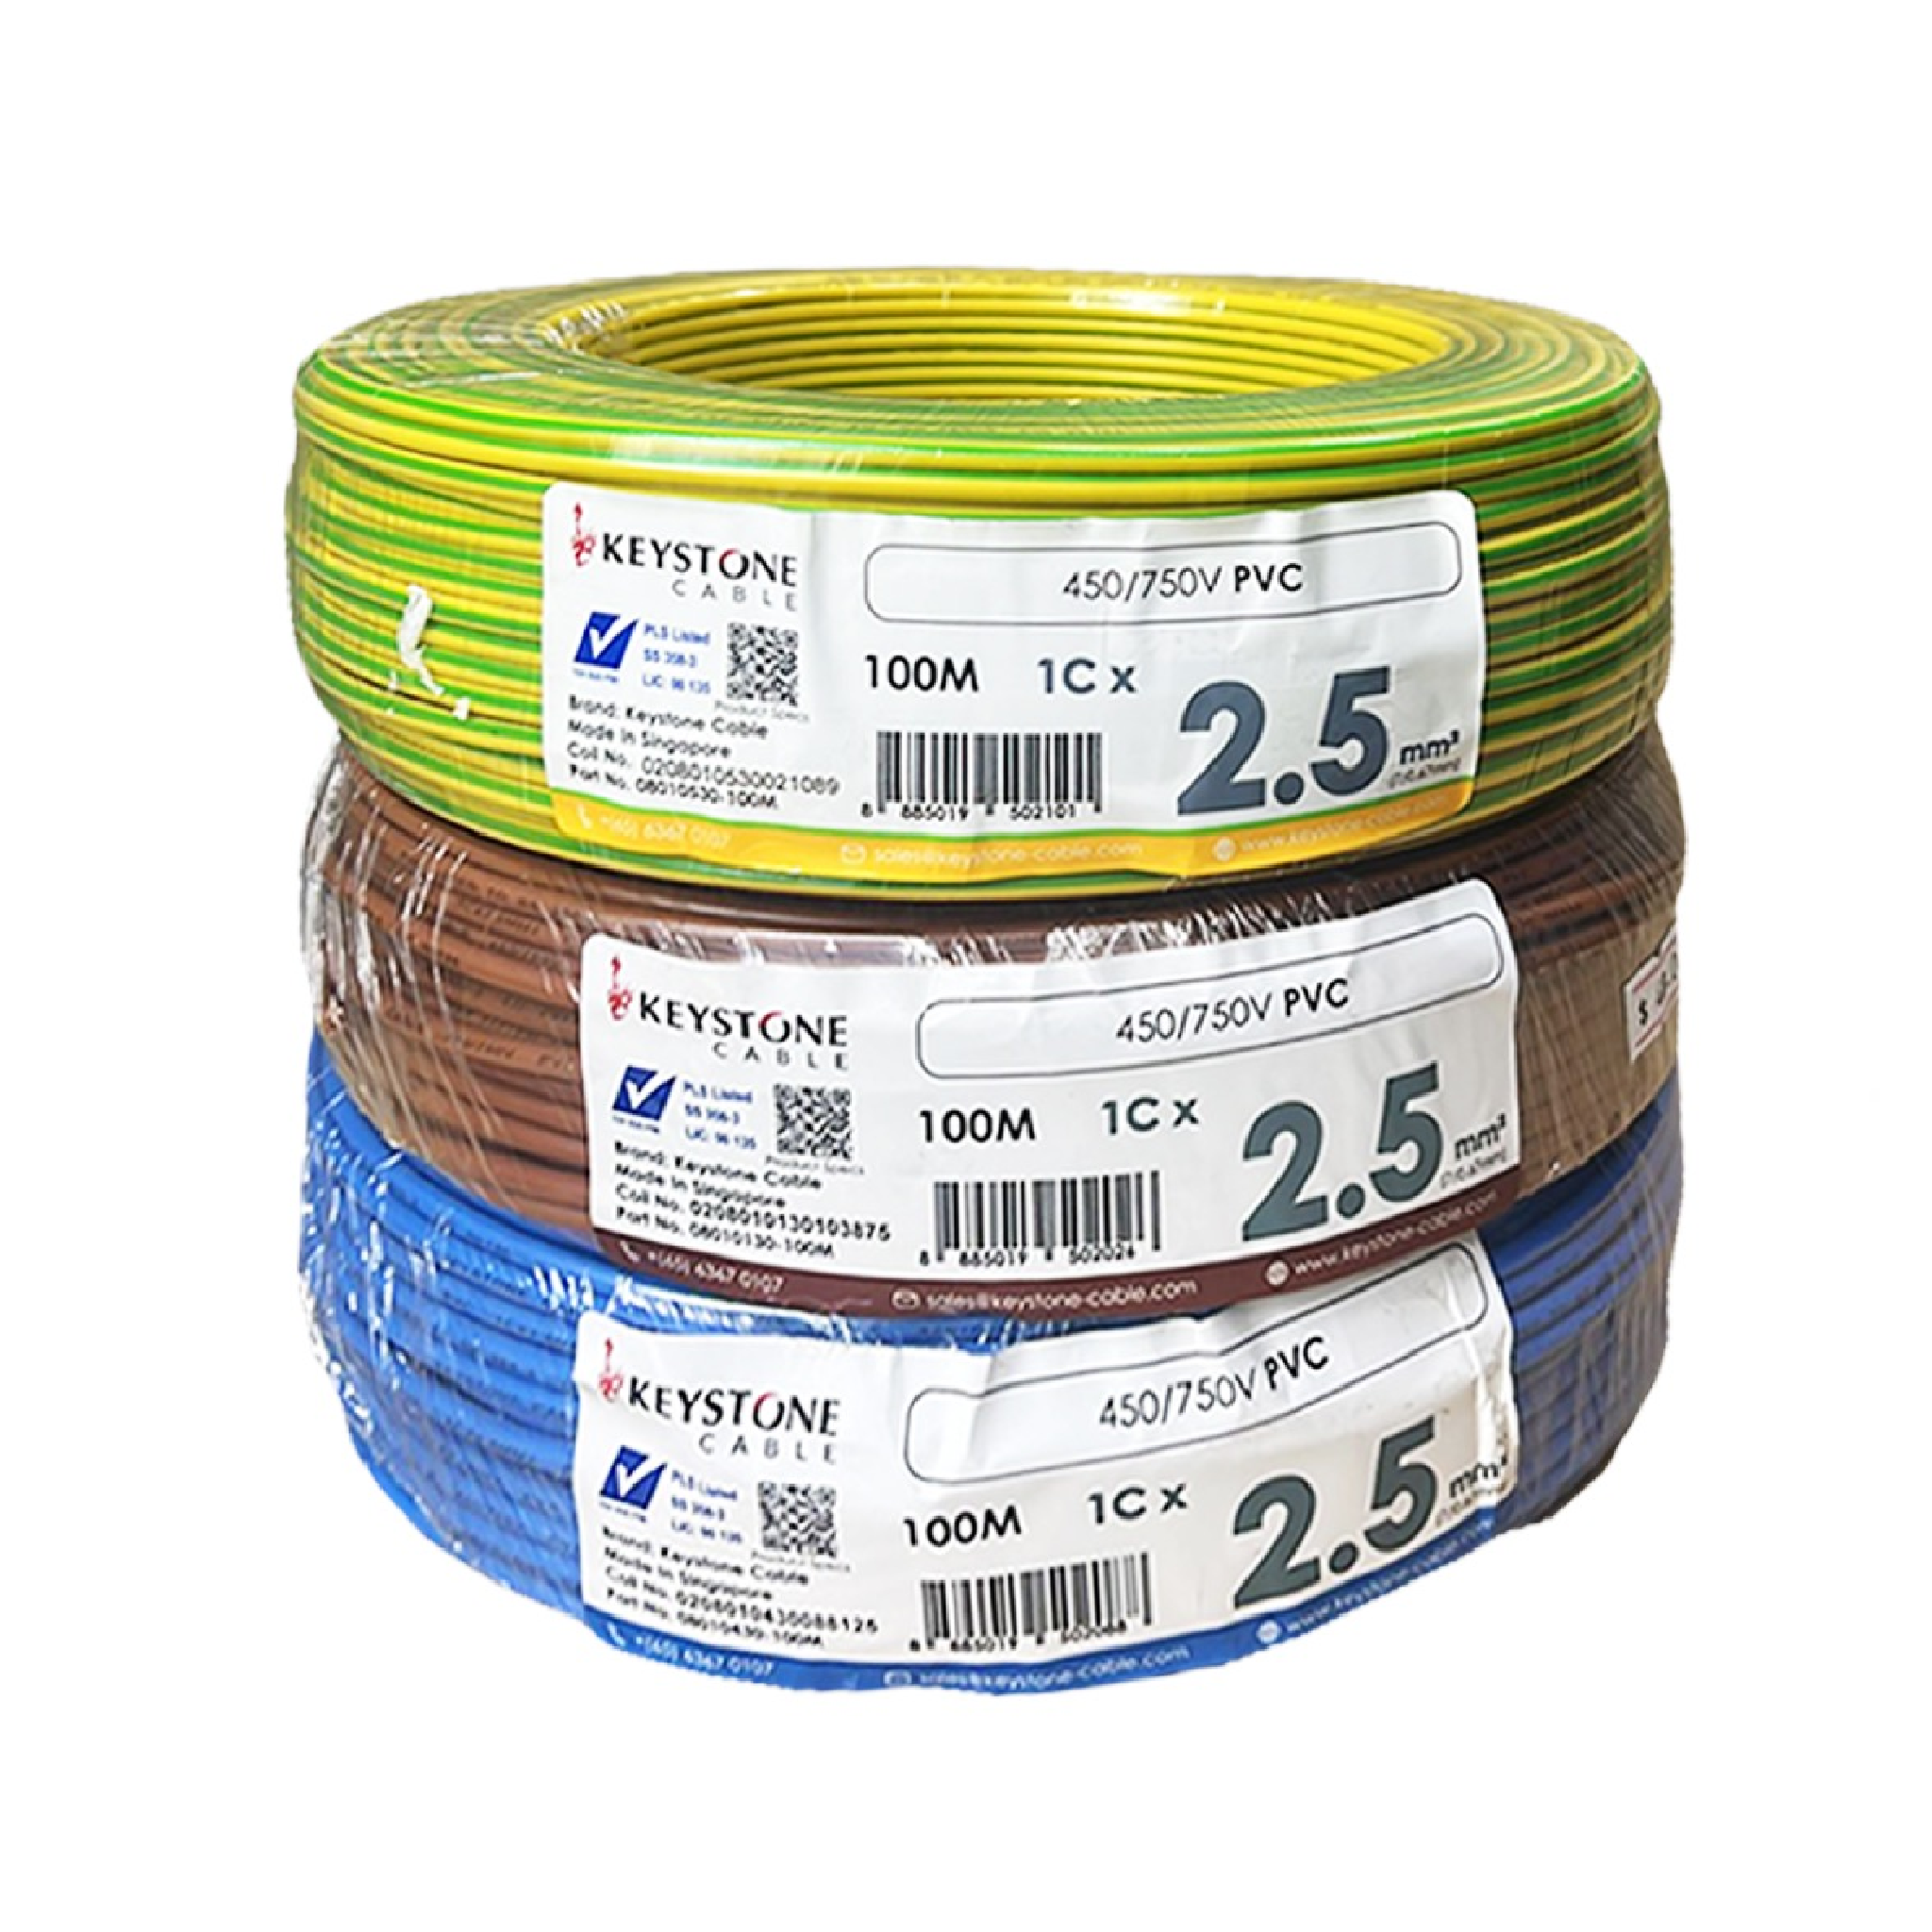 KEYSTONE PVC Insulated Non-Sheathed Cable 2.5mm2 (7/0.67mm) X